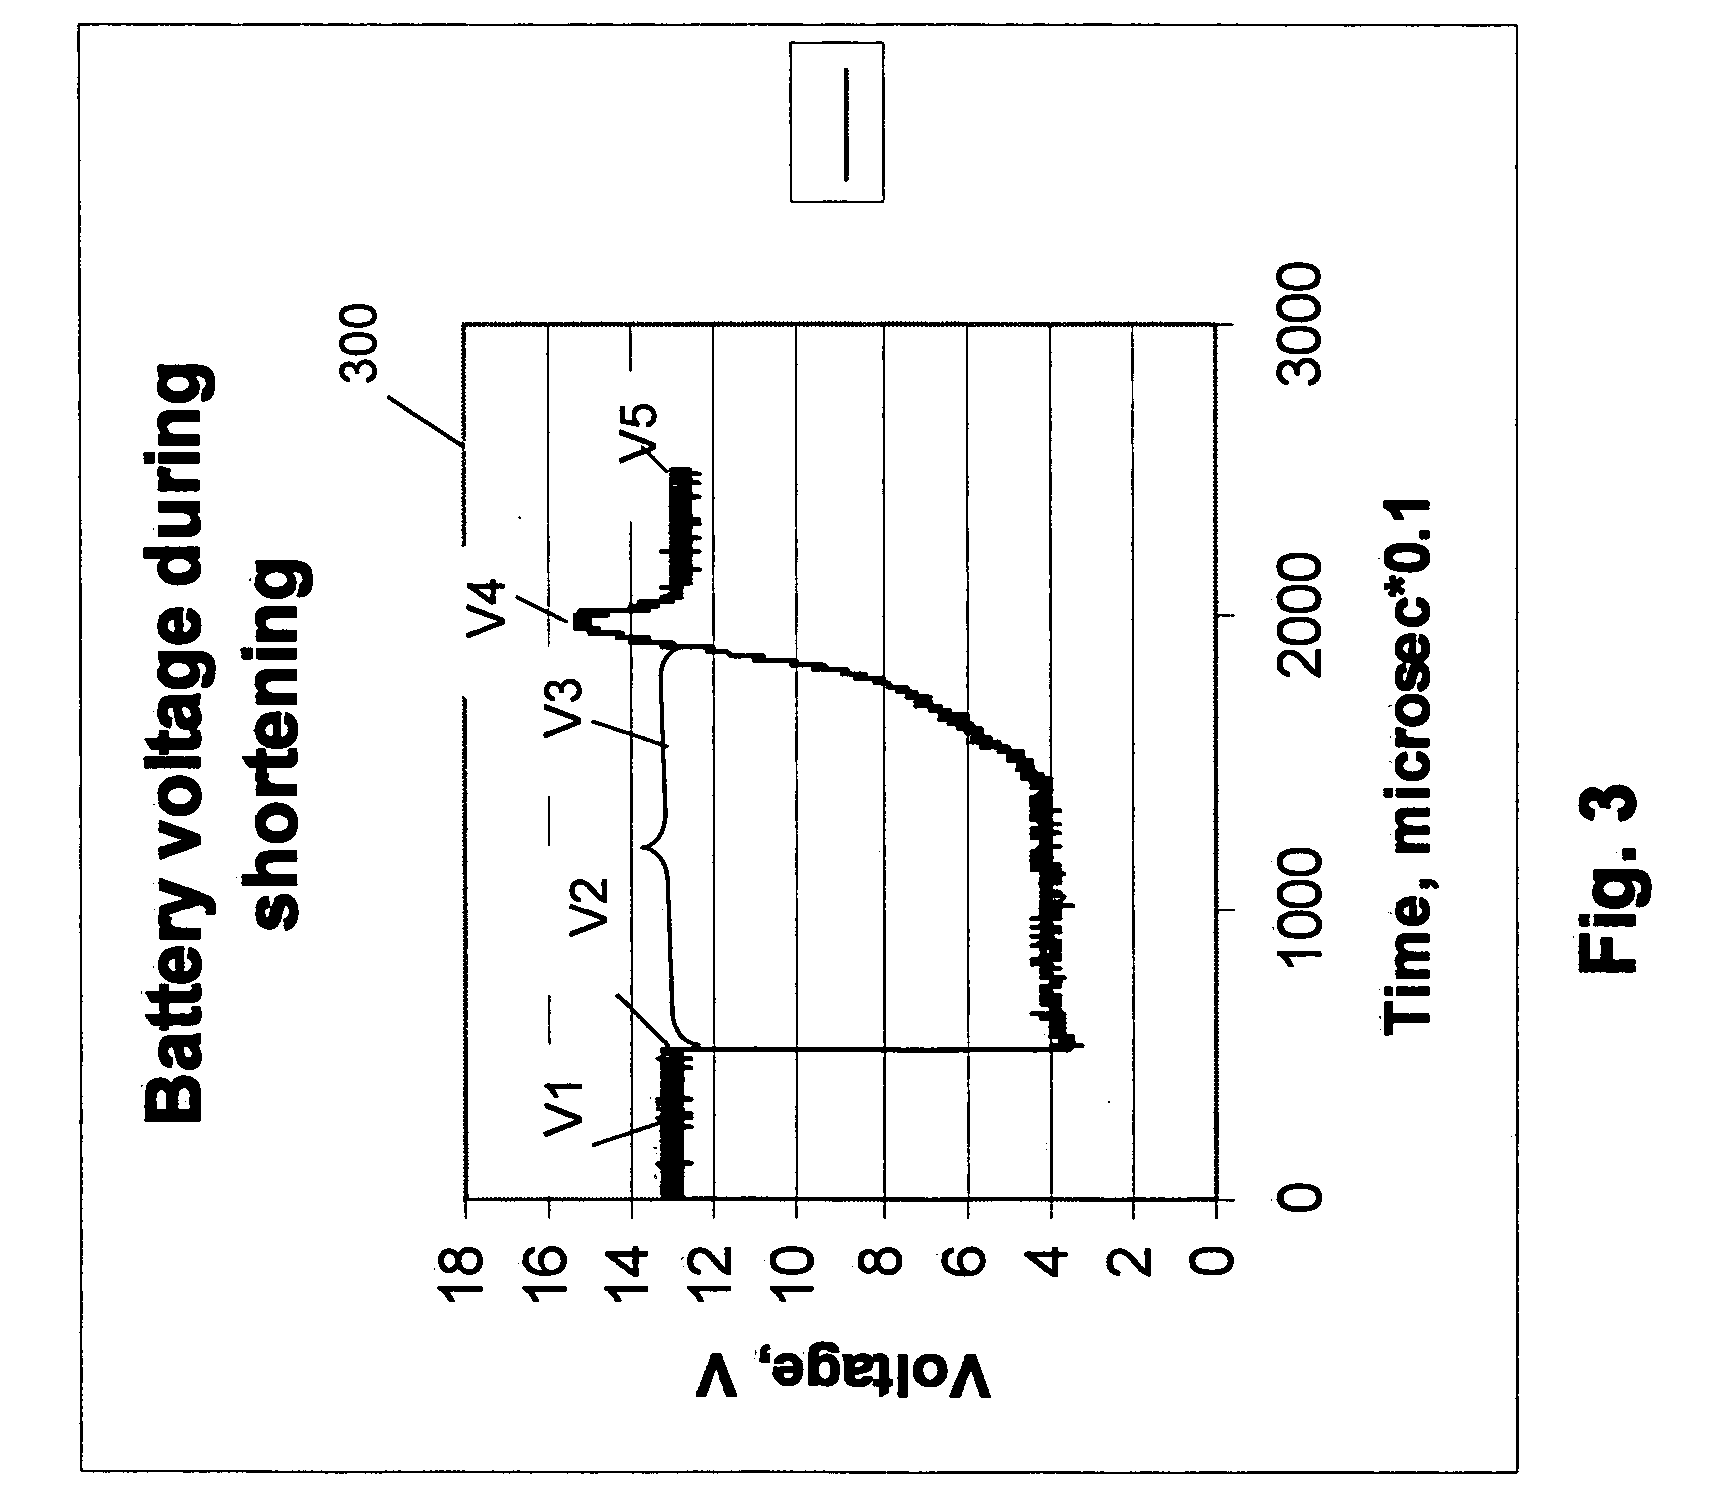 [method and apparatus for battery testing and measuring]